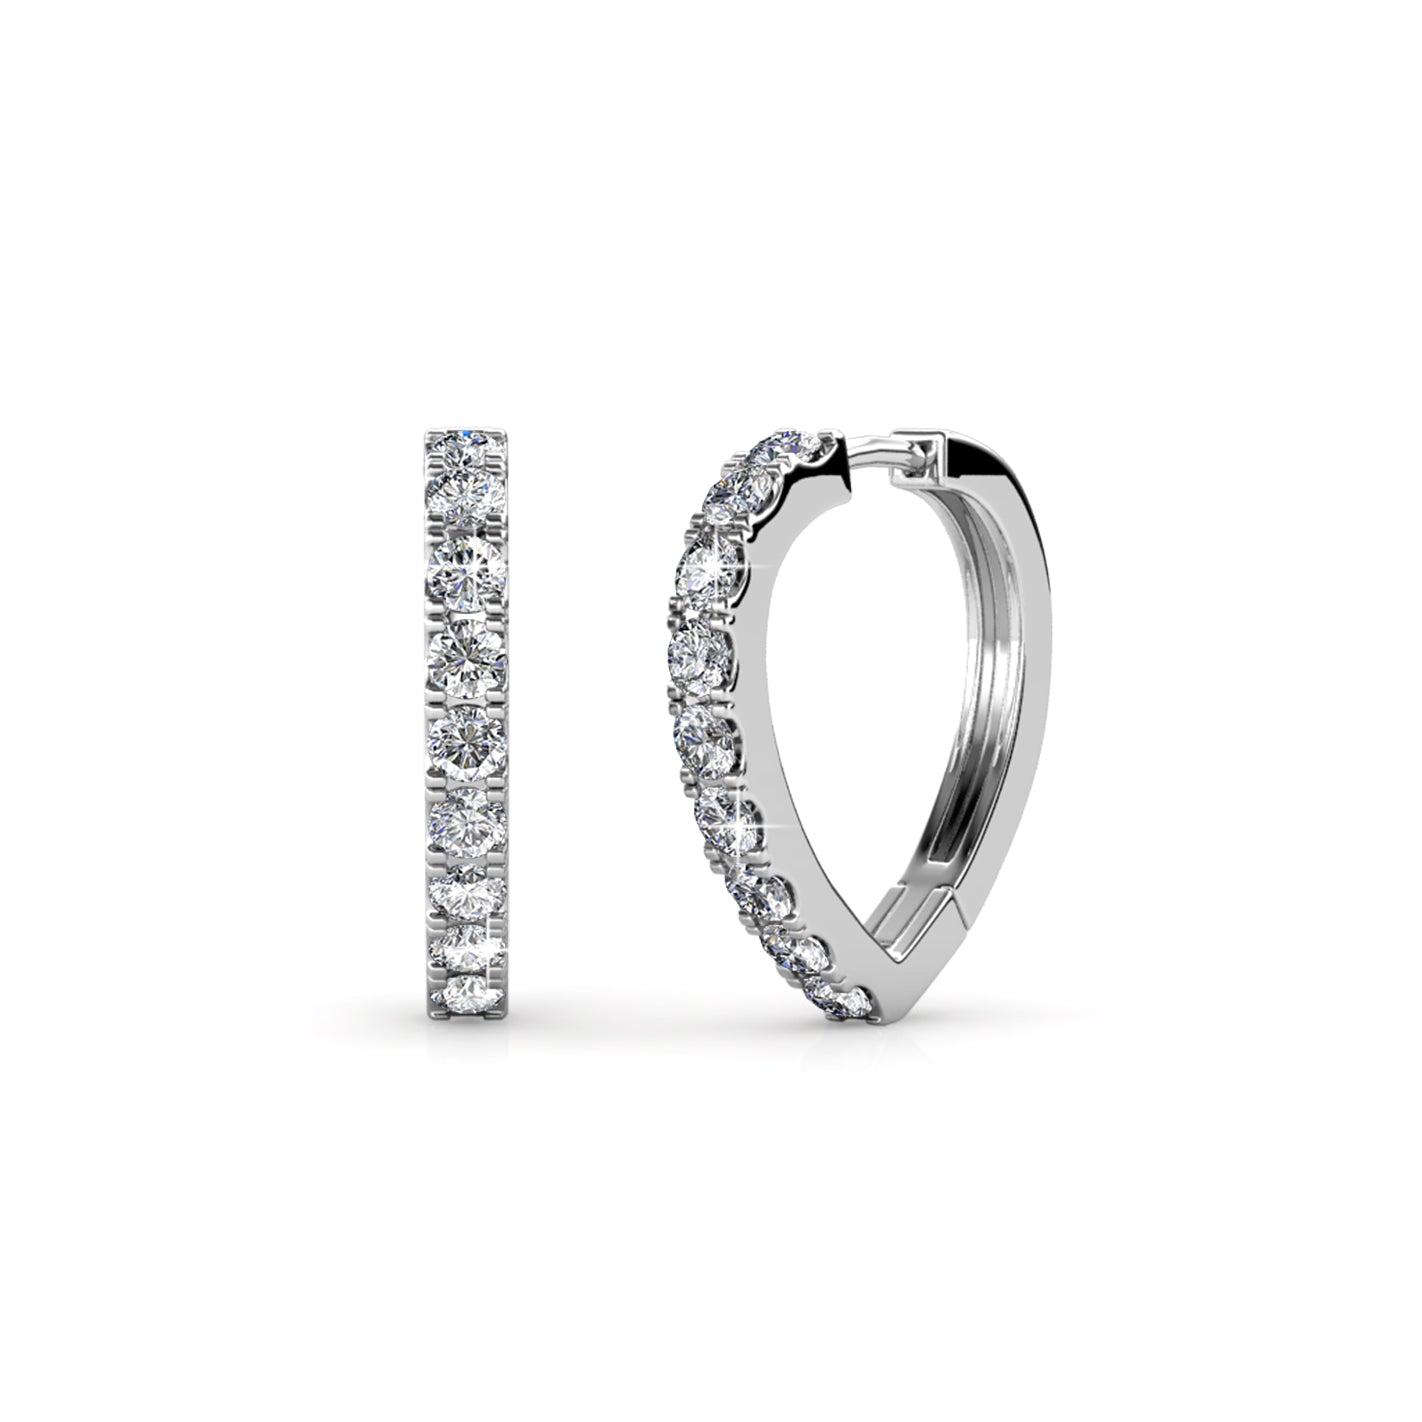 Waverly 18k White Gold Plated Hoop Earrings with Crystals